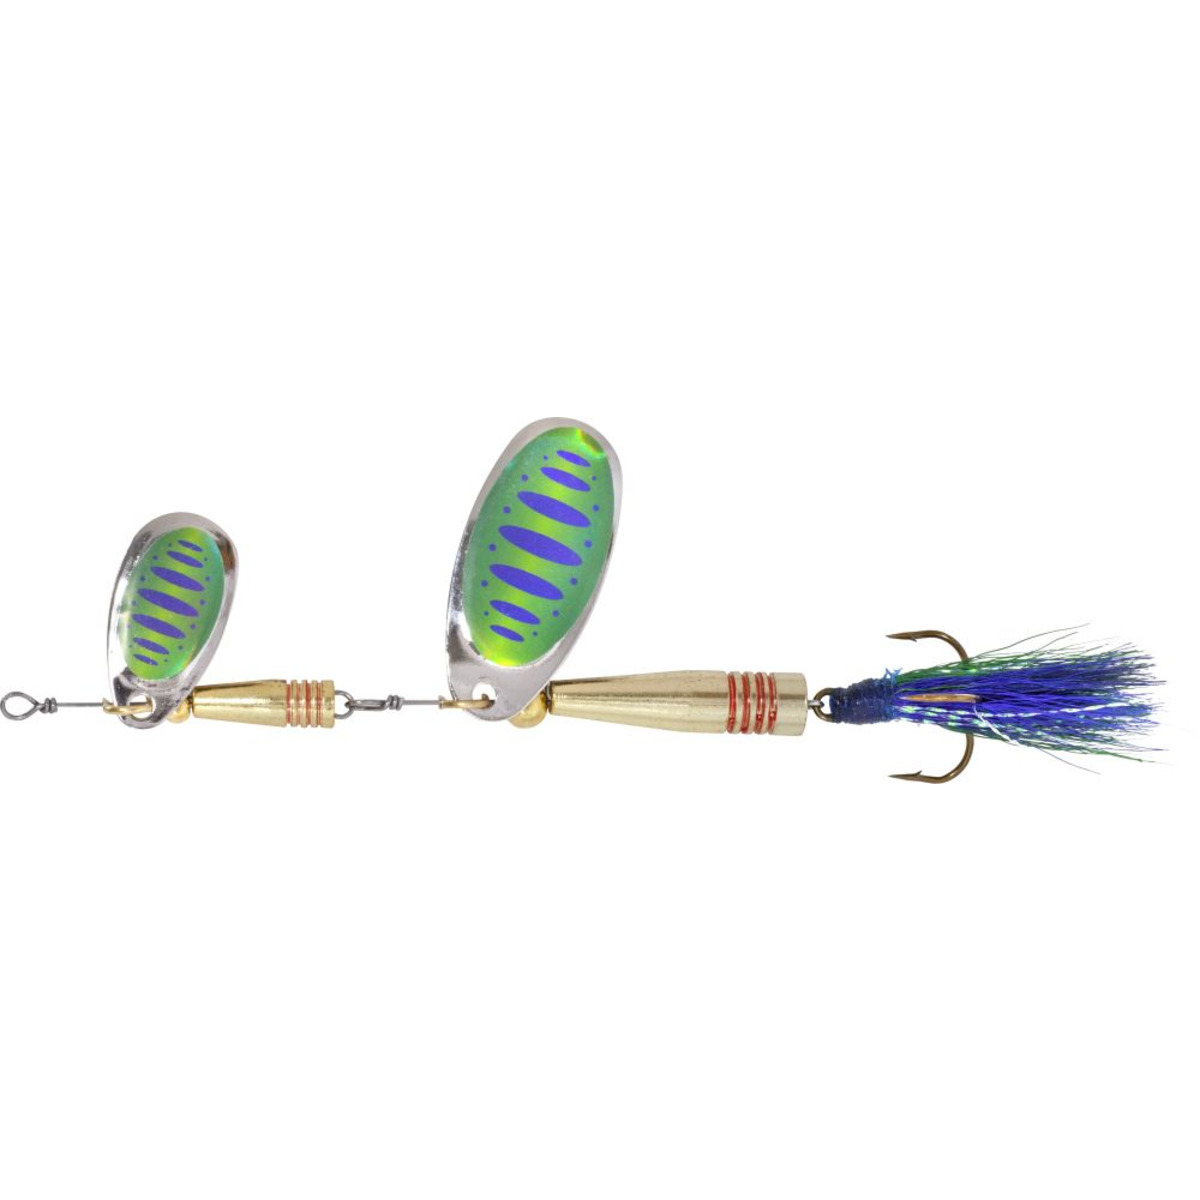 Zebco Waterwings Double Blade - 10 g - blue/green